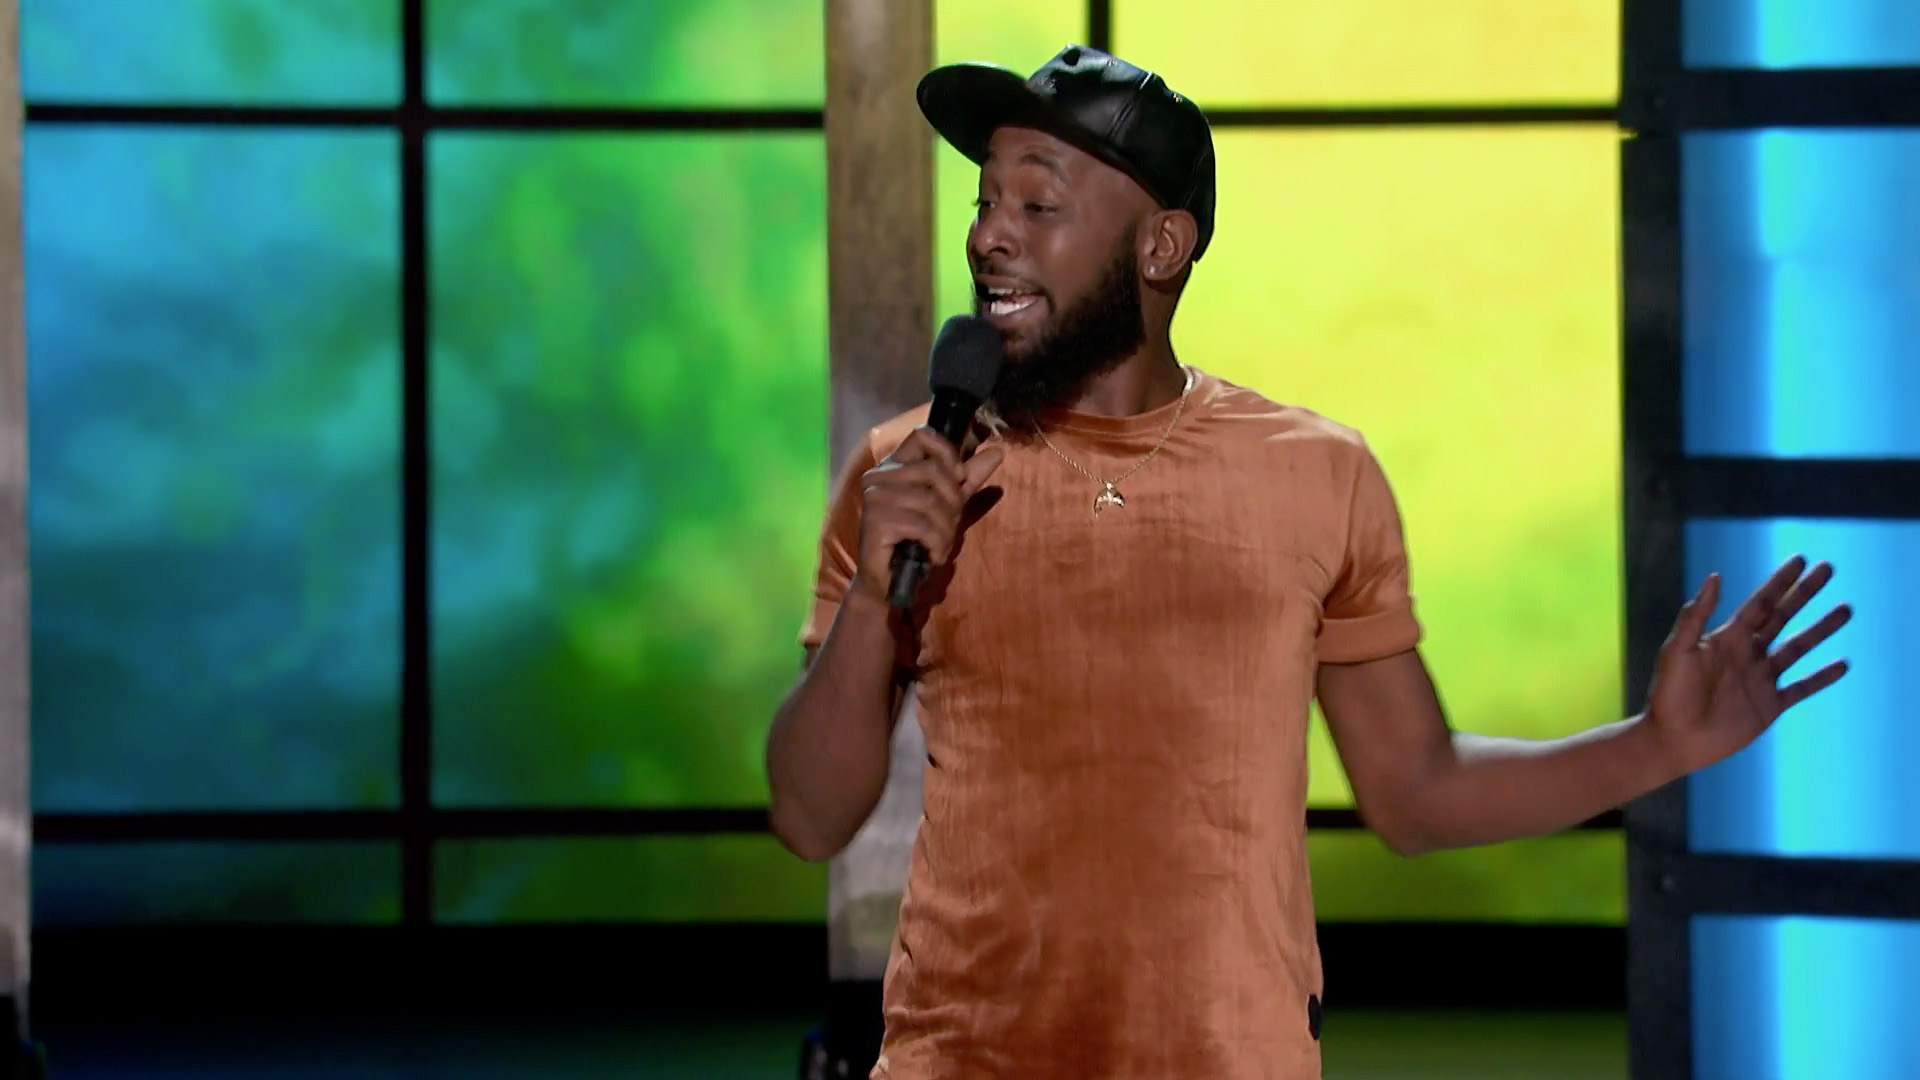 Karlous Miller wearing a velvet brown shirt and black cap while holding a mic